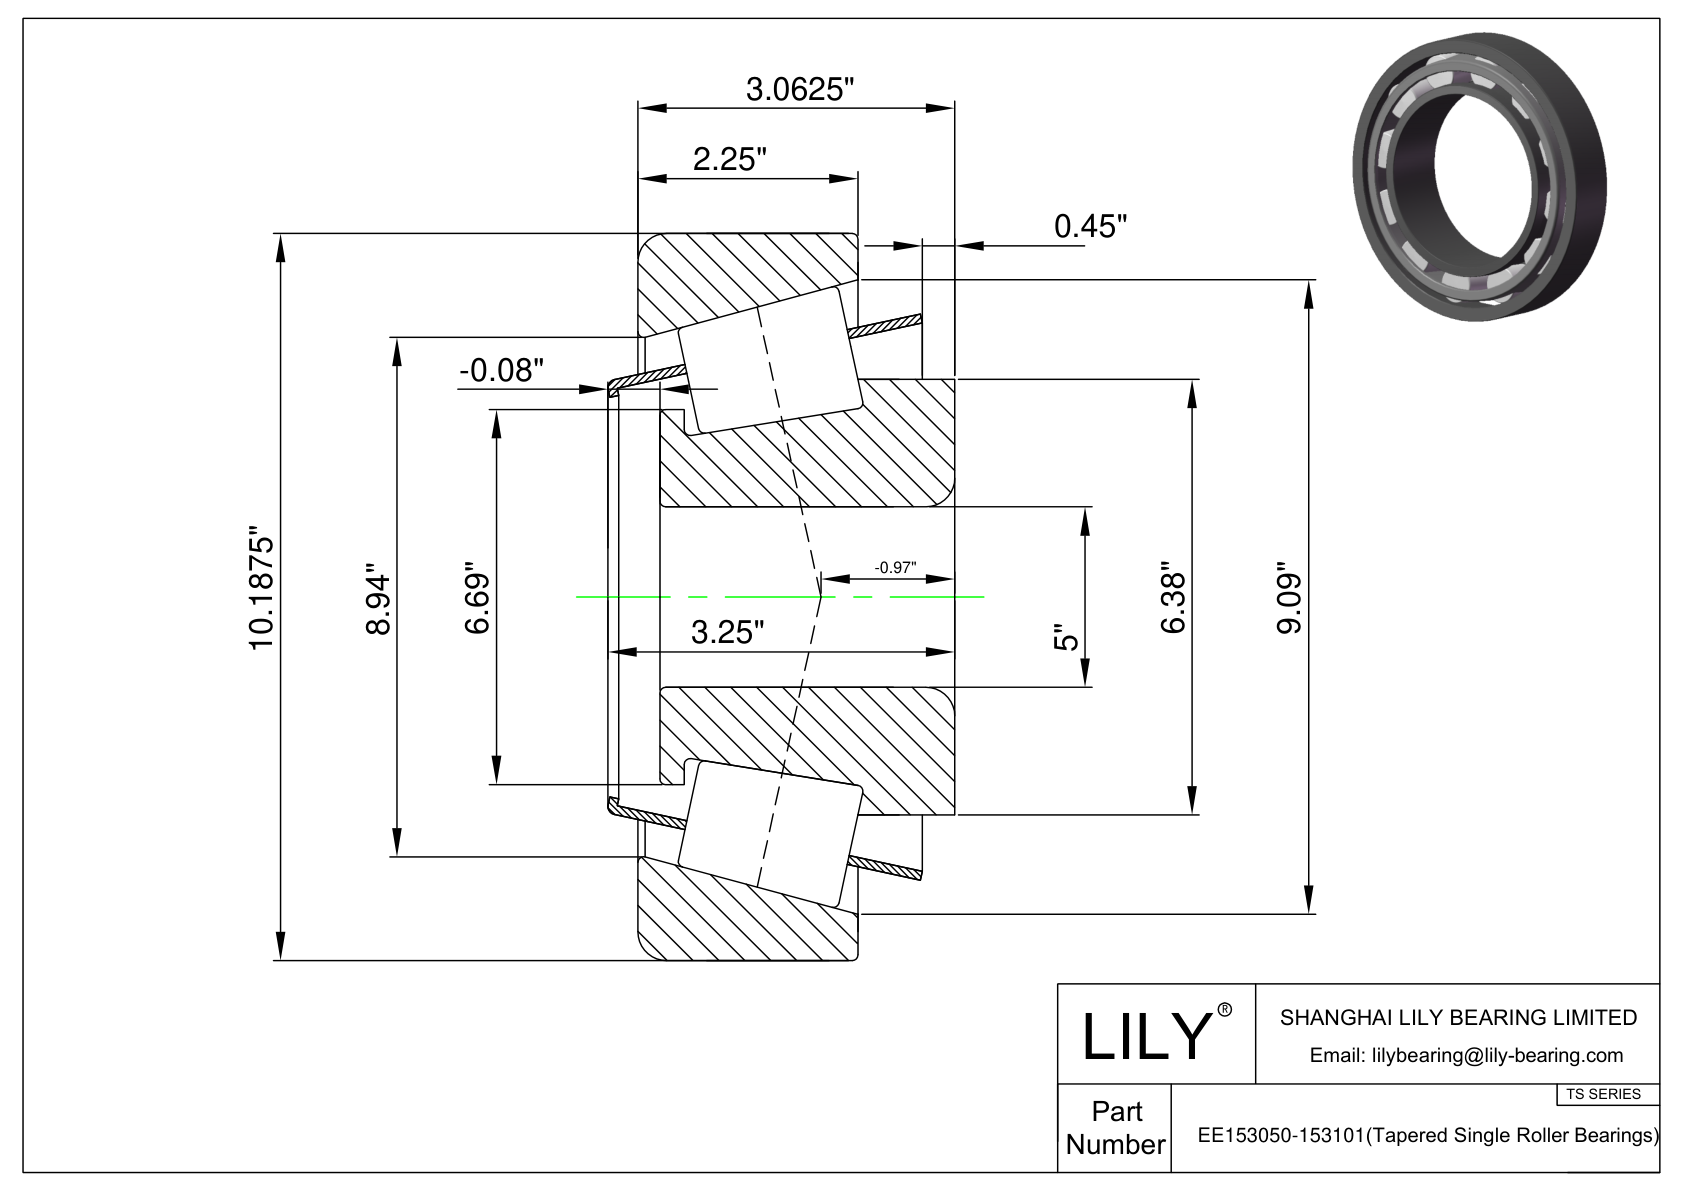 EE153050-153101 TS (Tapered Single Roller Bearings) (Imperial) cad drawing